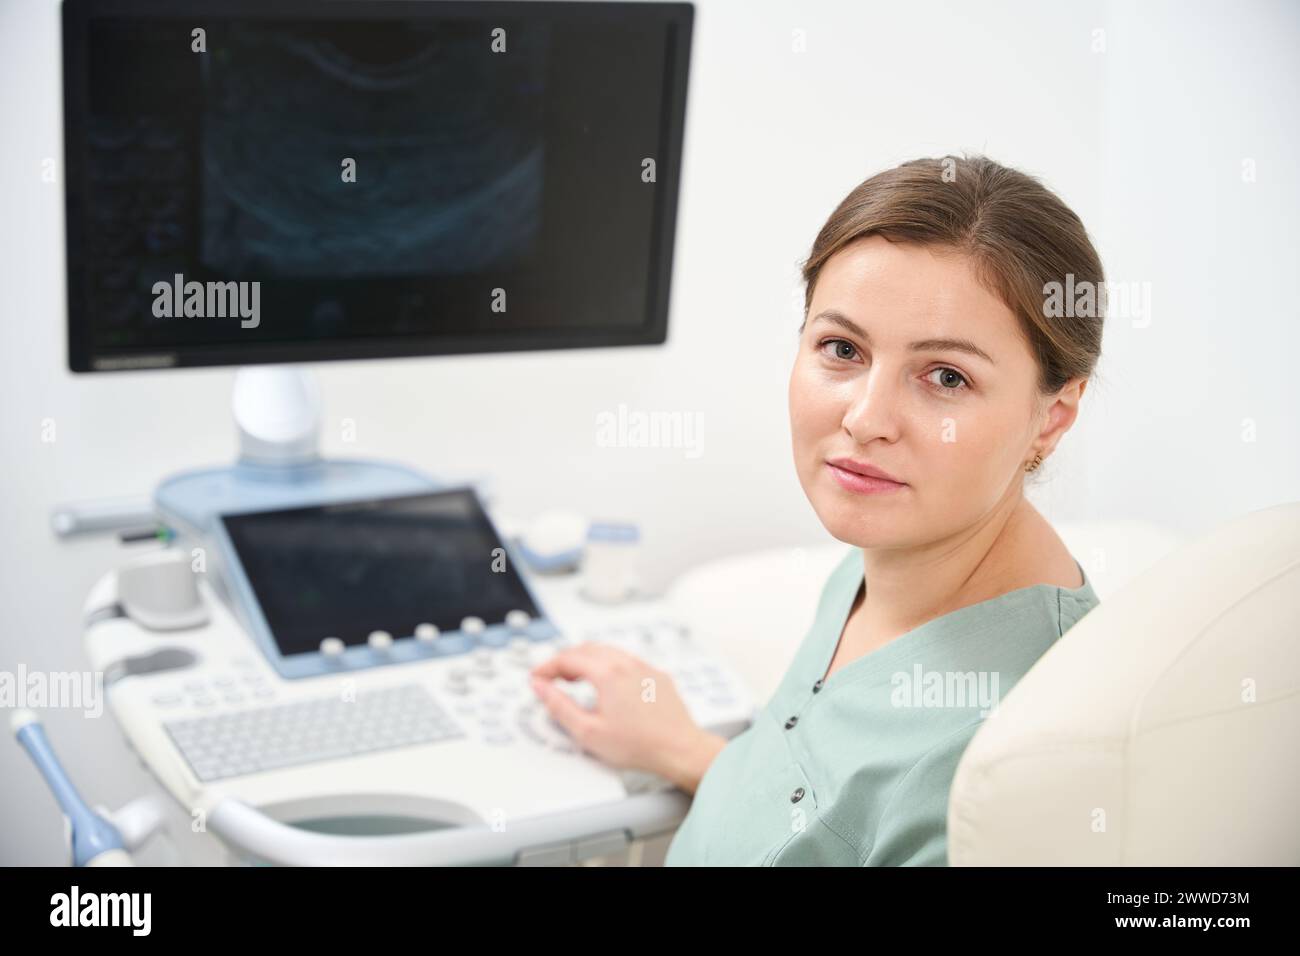 Female doctor looking at camera while working on ultrasound machine in clinic Stock Photo